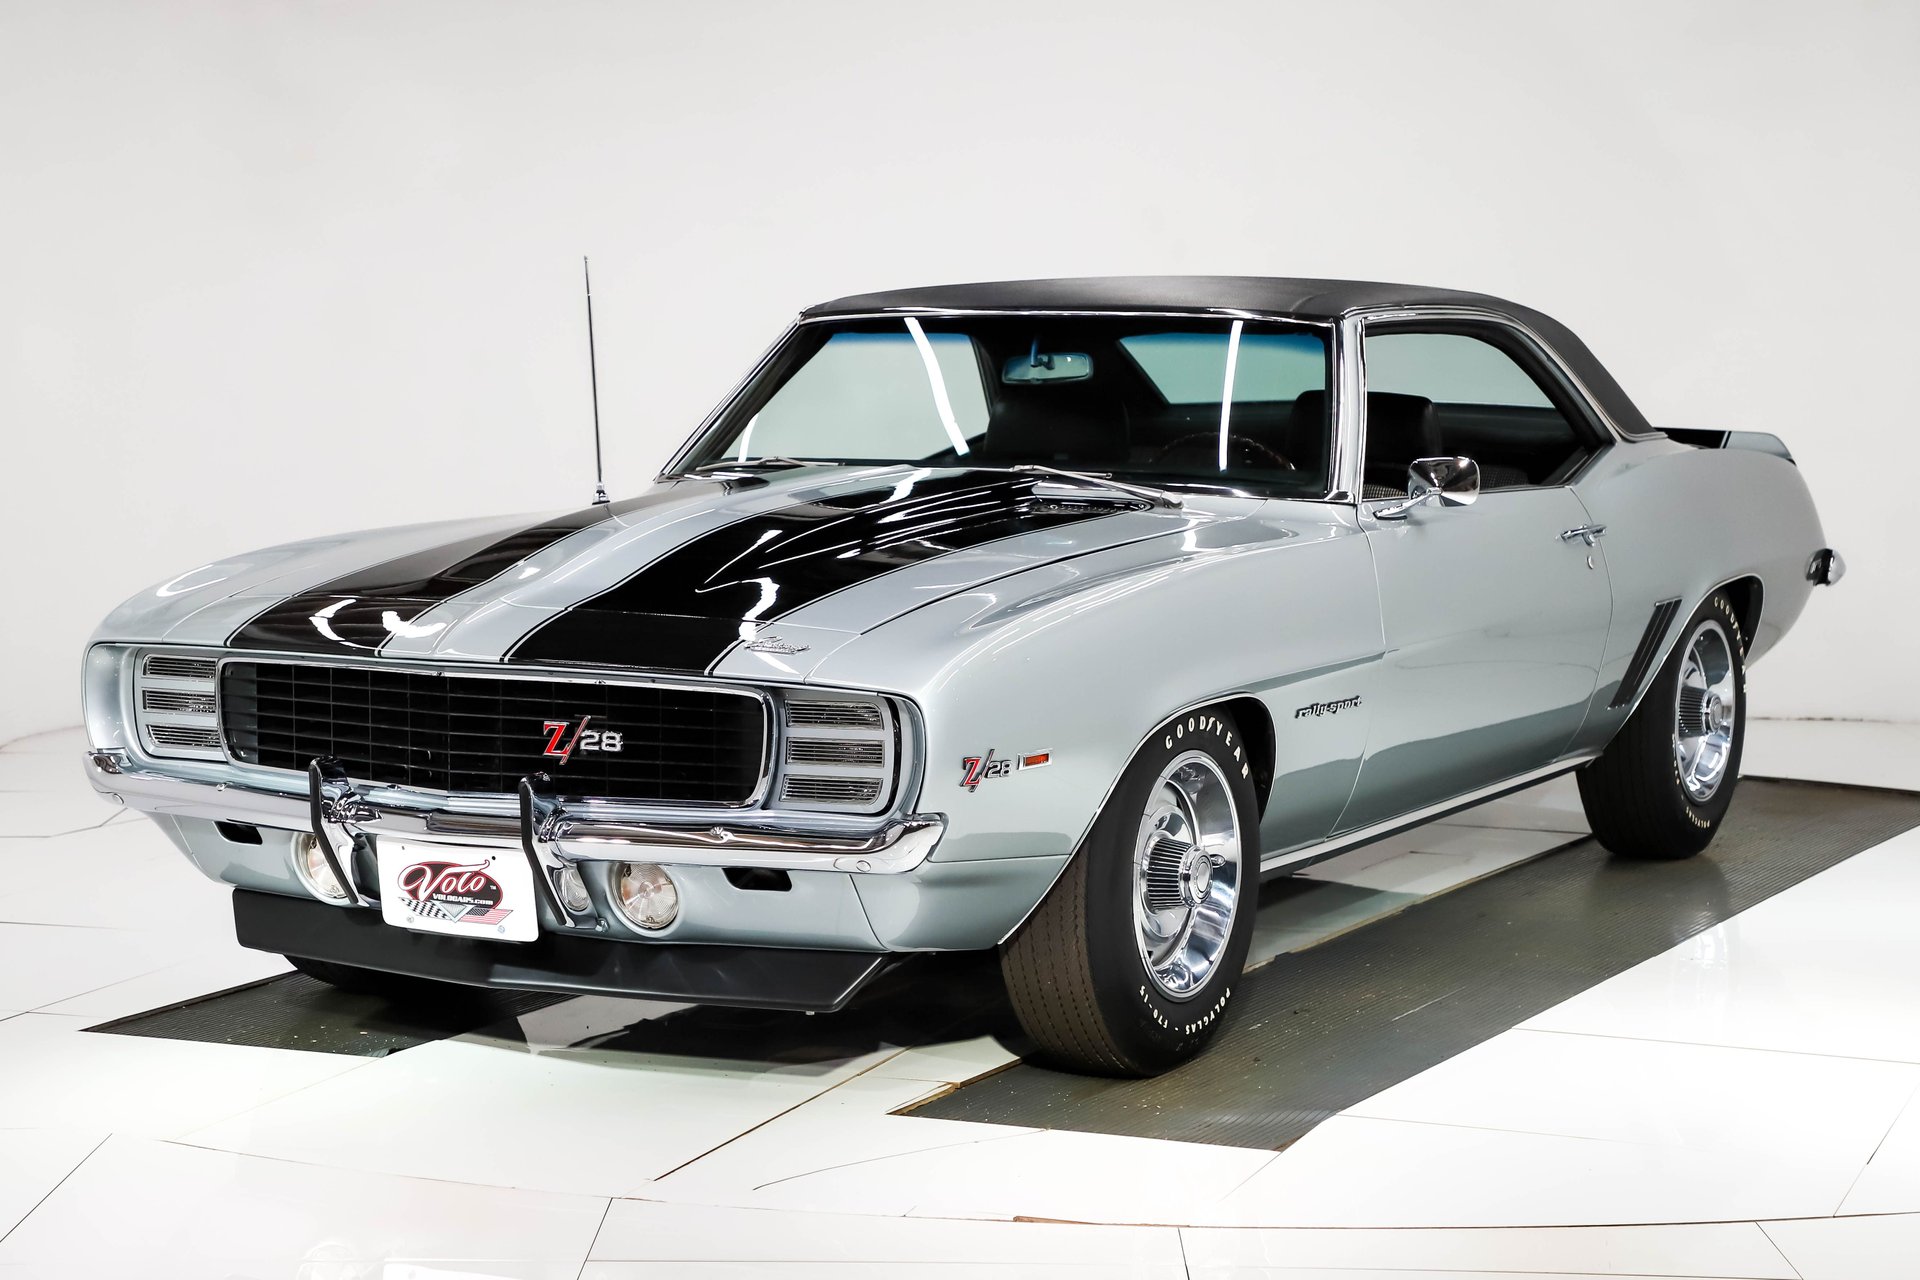 The Ultimate Muscle Machine: 1969 Chevrolet Camaro RS Z28